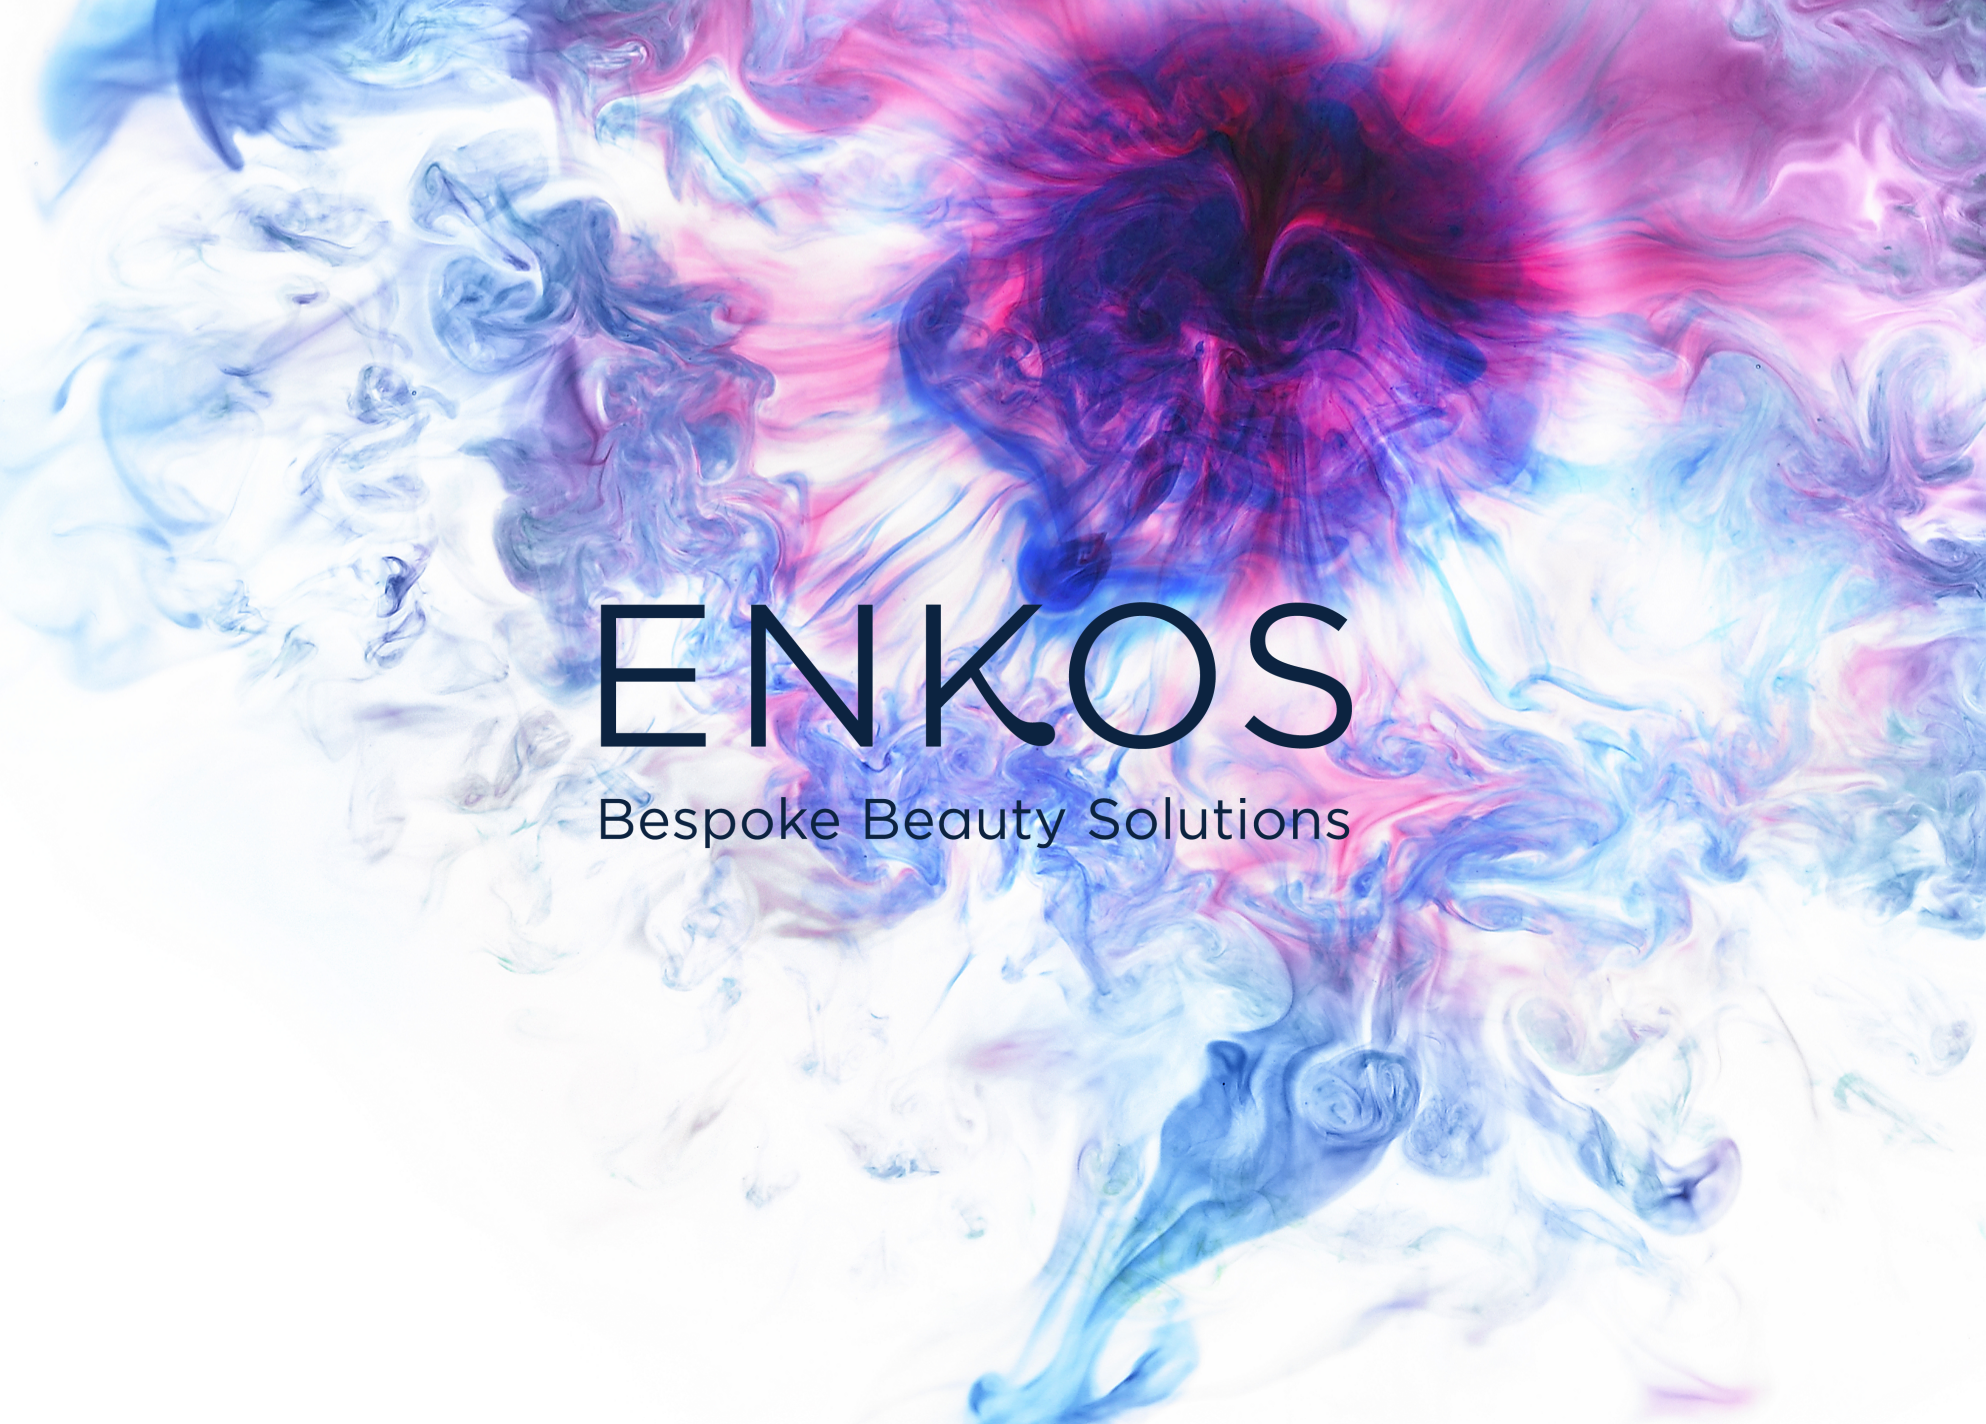 Our Ongoing Partnership with Enkos Developments to Offer Bespoke Beauty Solutions